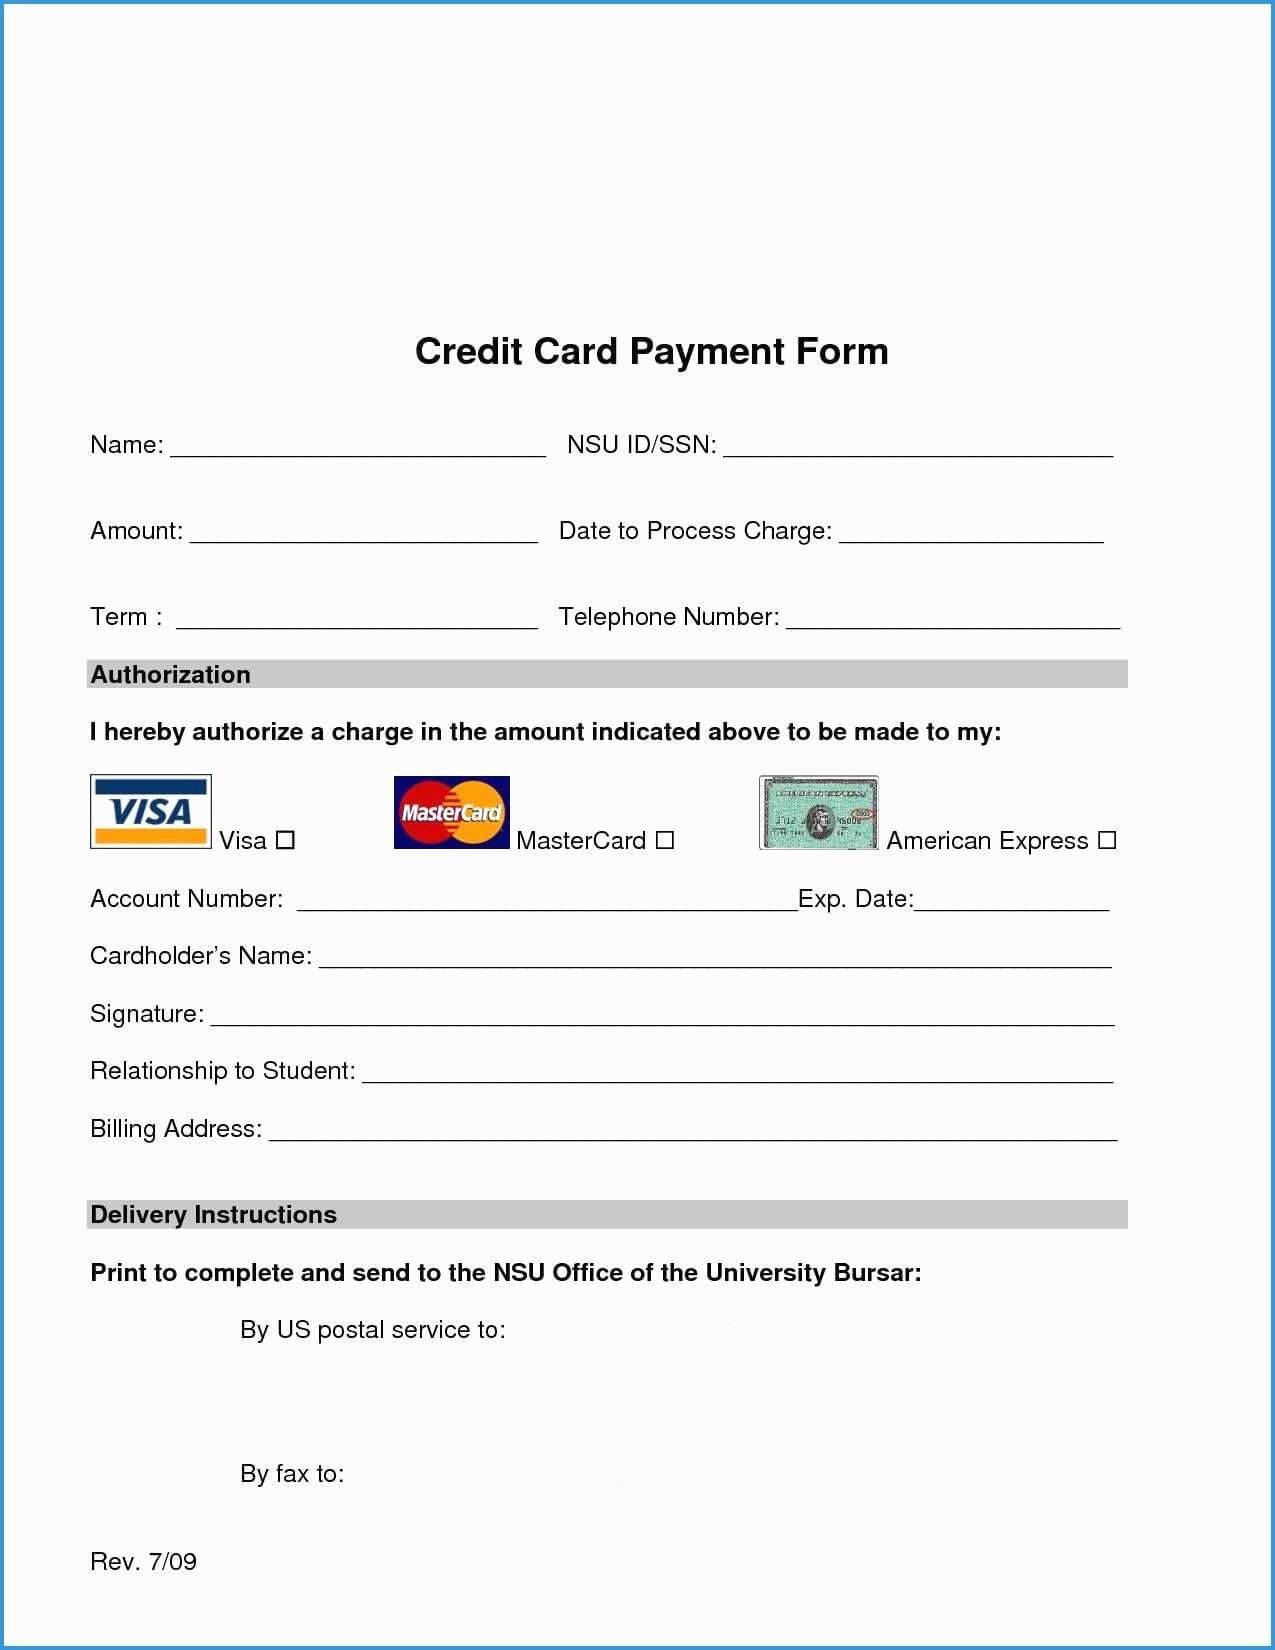 023 Template Ideas Credit Card Form Authorization Pdf Of With Credit Card Payment Form Template Pdf